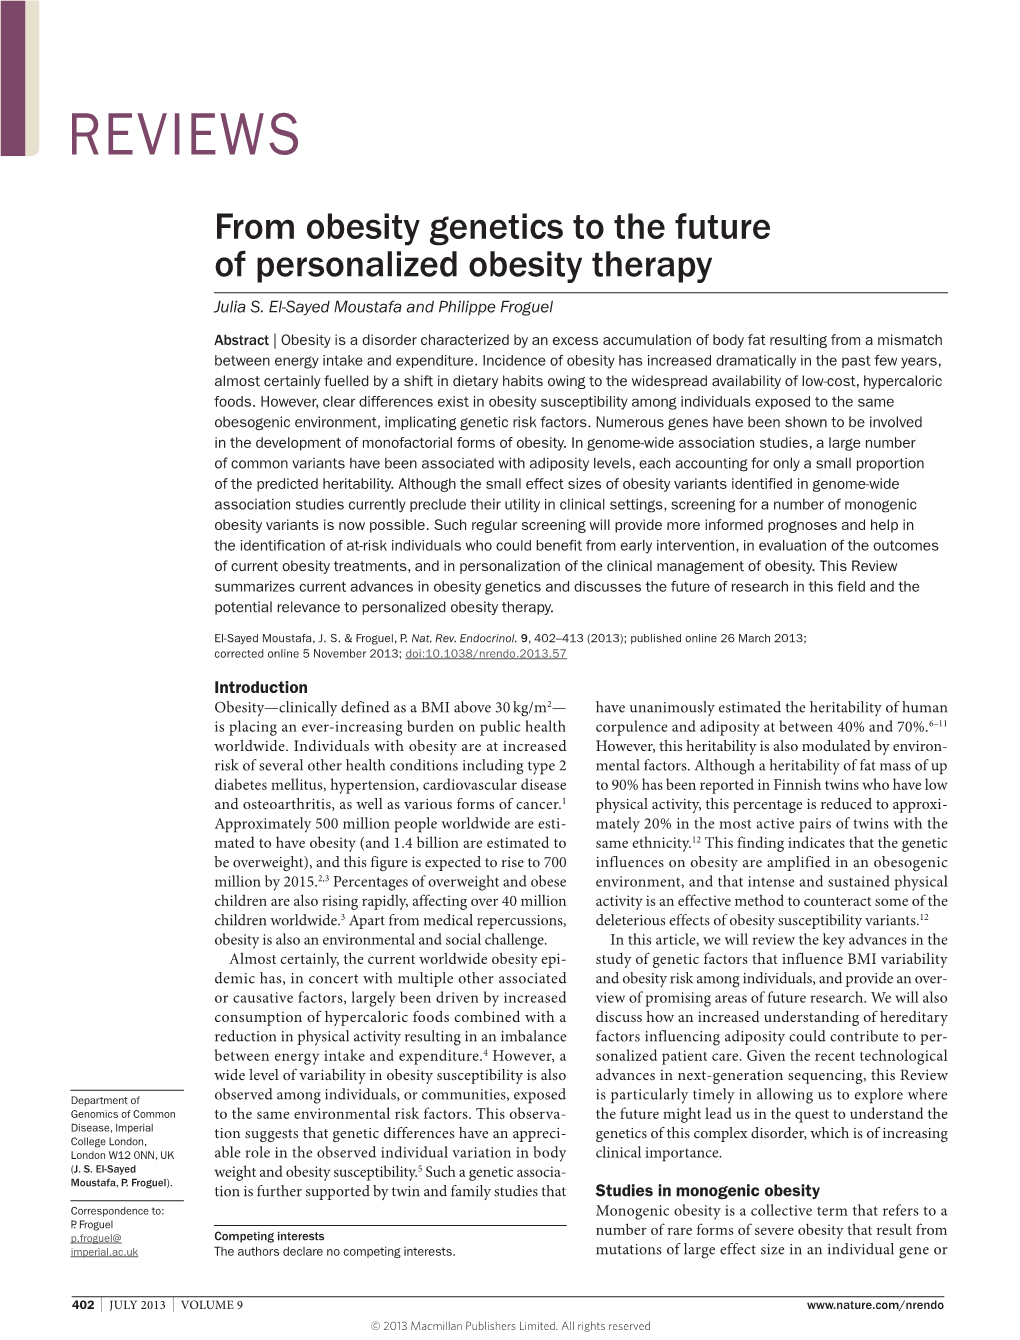 From Obesity Genetics to the Future of Personalized Obesity Therapy Julia S